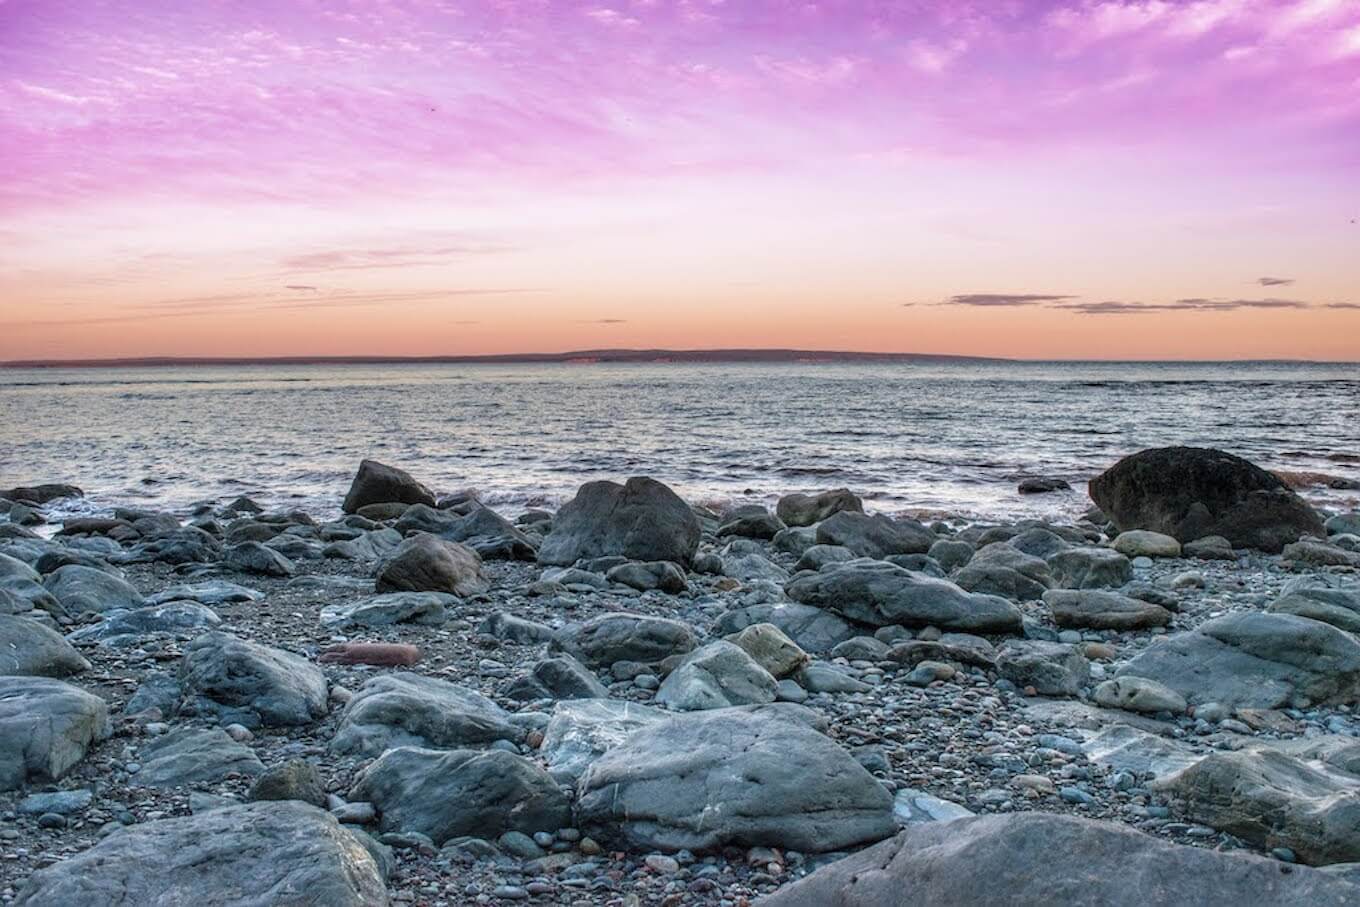 A photo of a rocky beach at sunset to demonstrate what nature photography is.